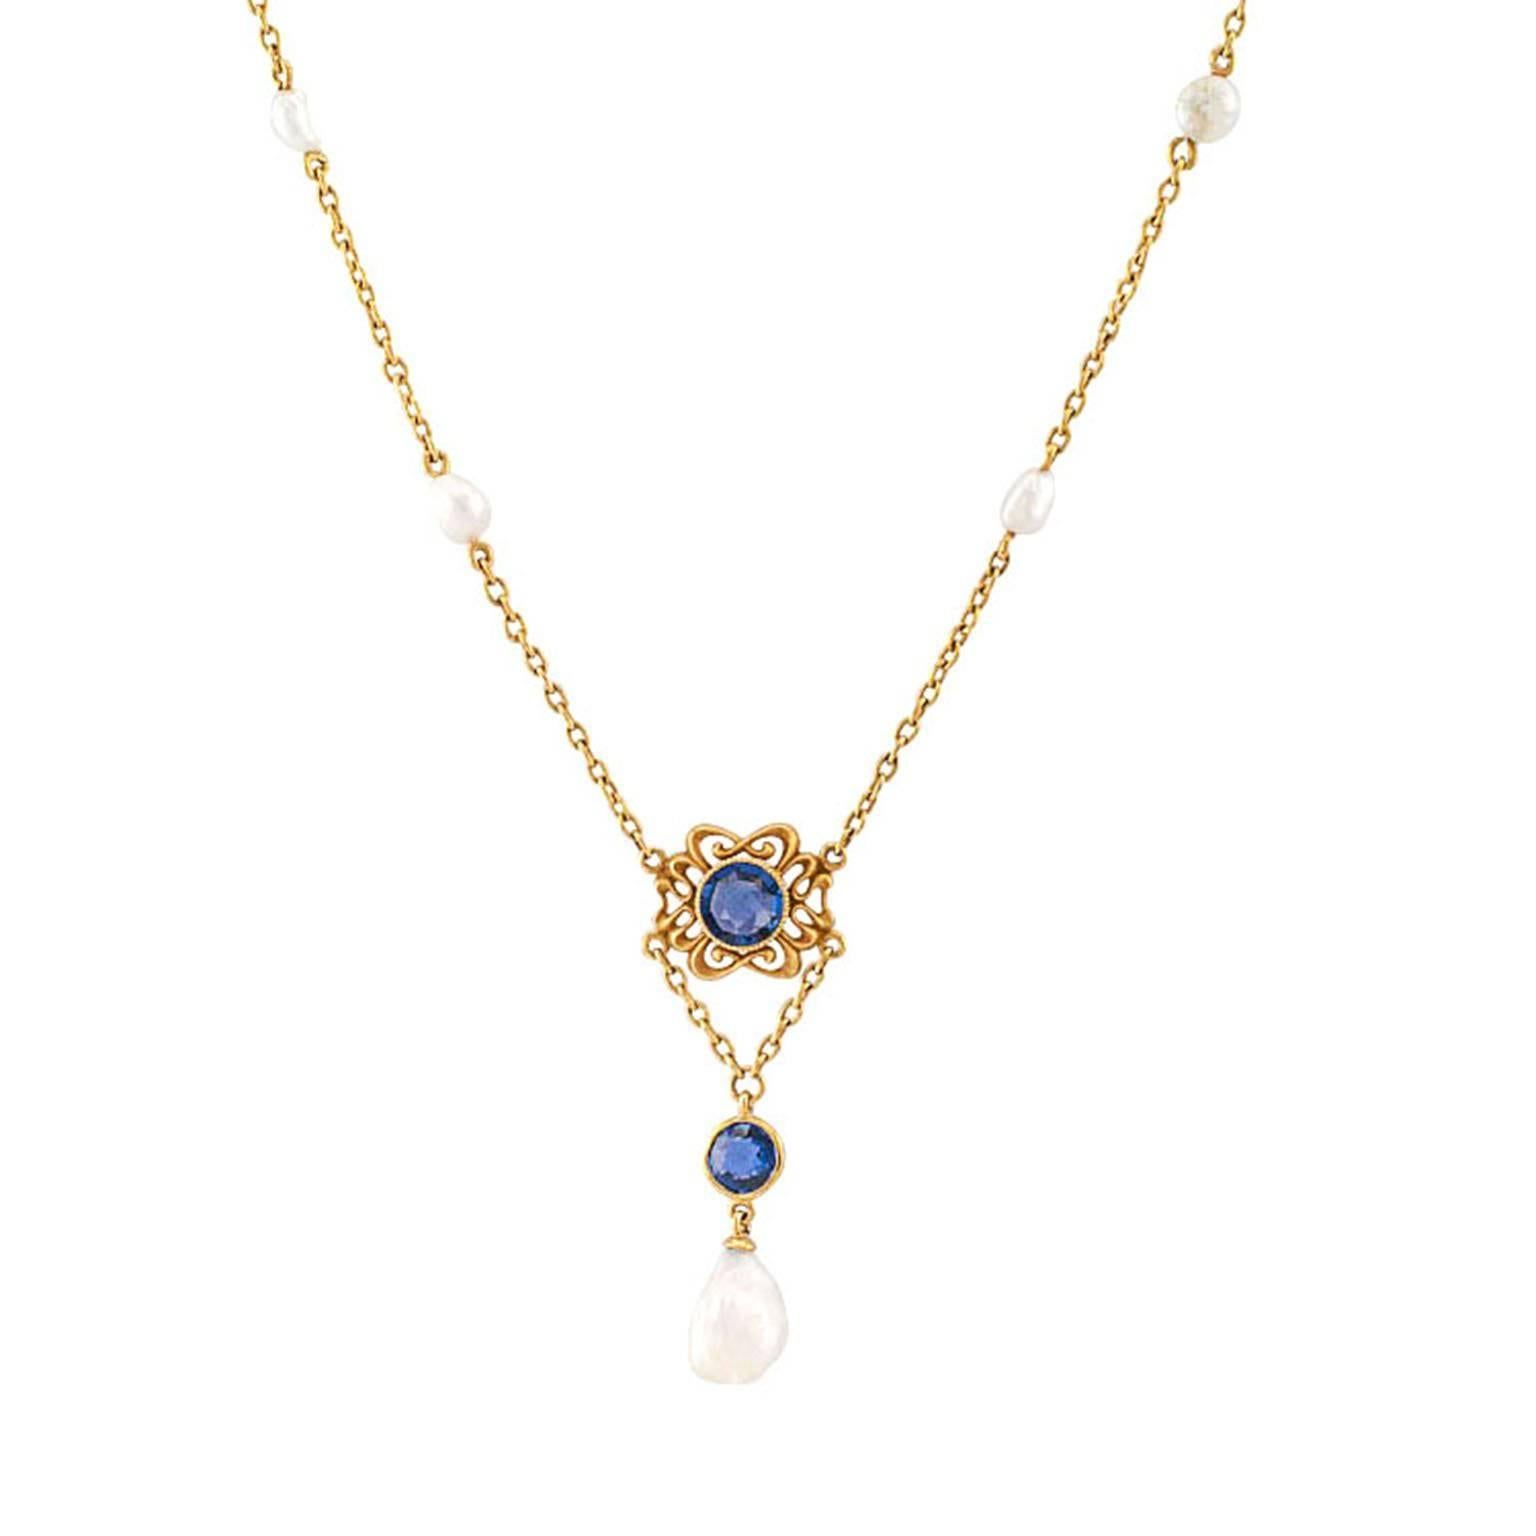 Art Nouveau Sapphire and Pearl Necklace Attributed to Krementz

Art Nouveau pearl and sapphire necklace mounted in 14-karat gold attributed to Krementz circa 1905.  Decorated on the front by an organic motif defined by delicate open work centering